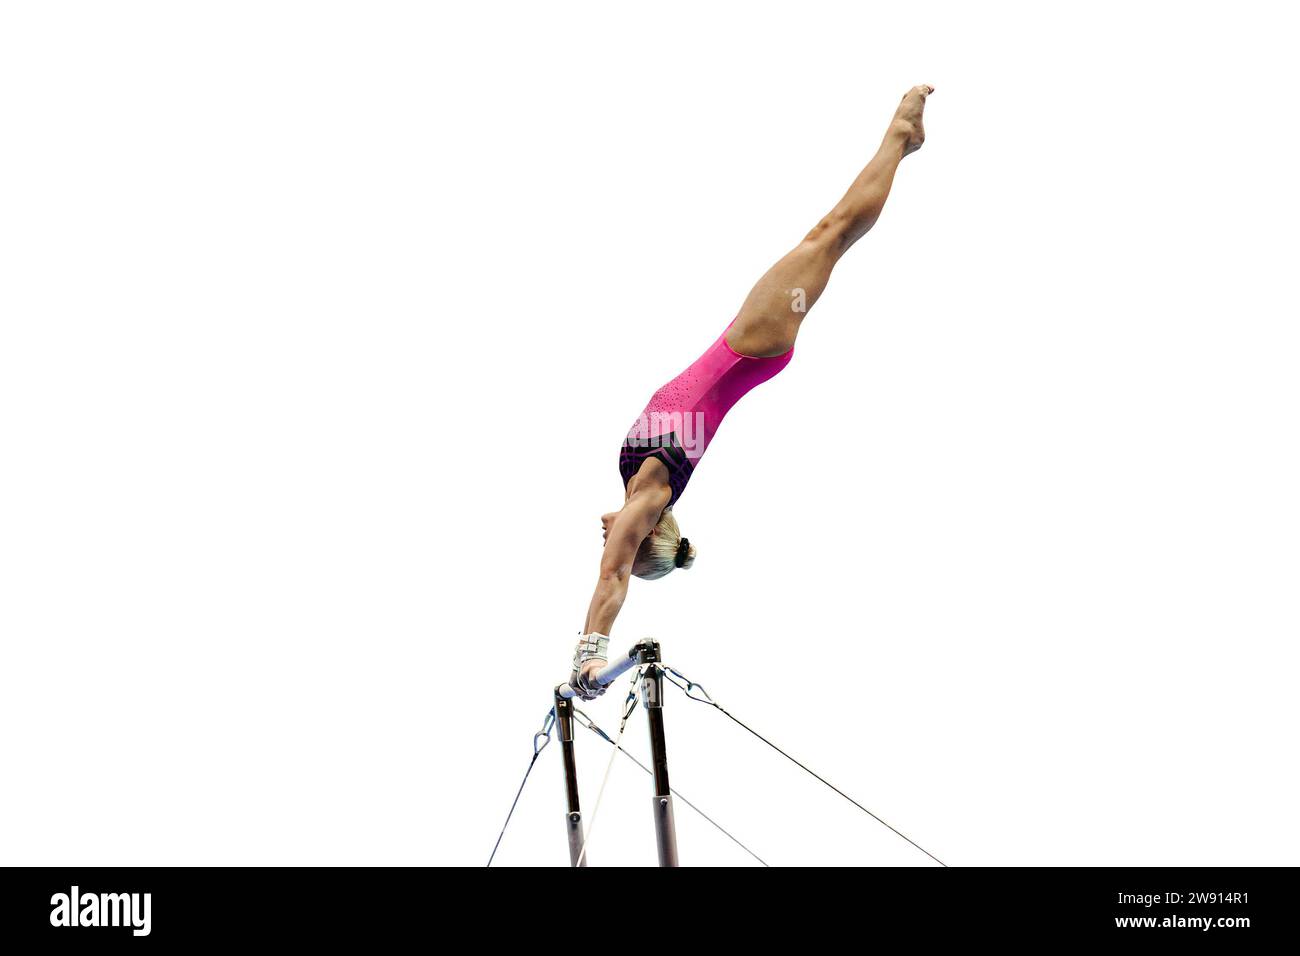 female gymnast performing exercise on uneven bars gymnastics, isolated on white background Stock Photo